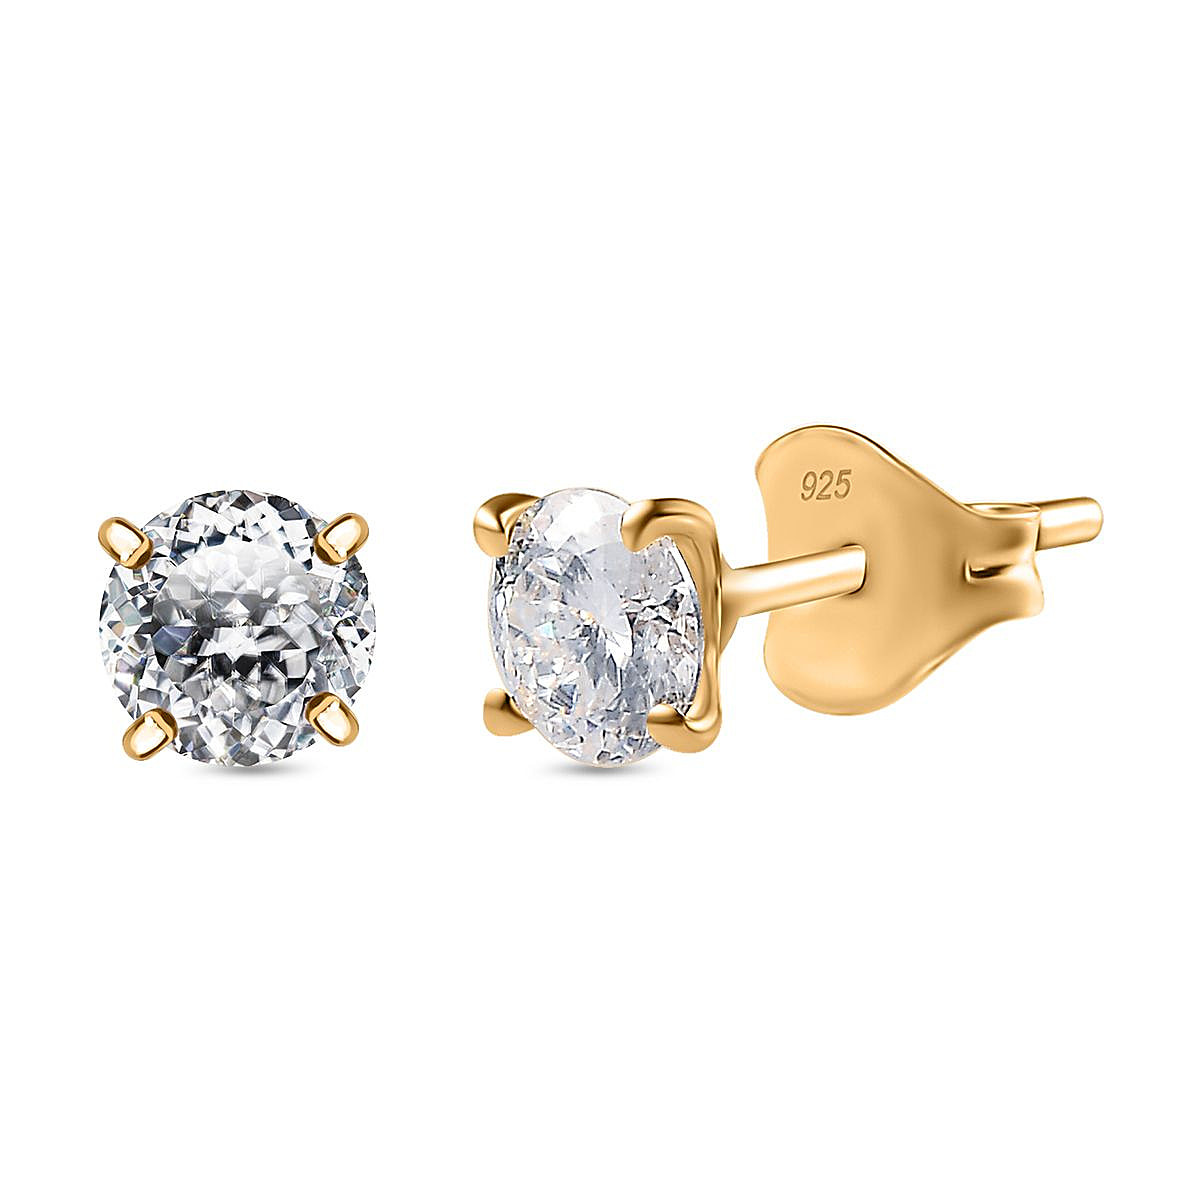 Moissanite Solitaire Stud Earring in 18k Gold Vermeil Sterling Silver 1.00 Ct.